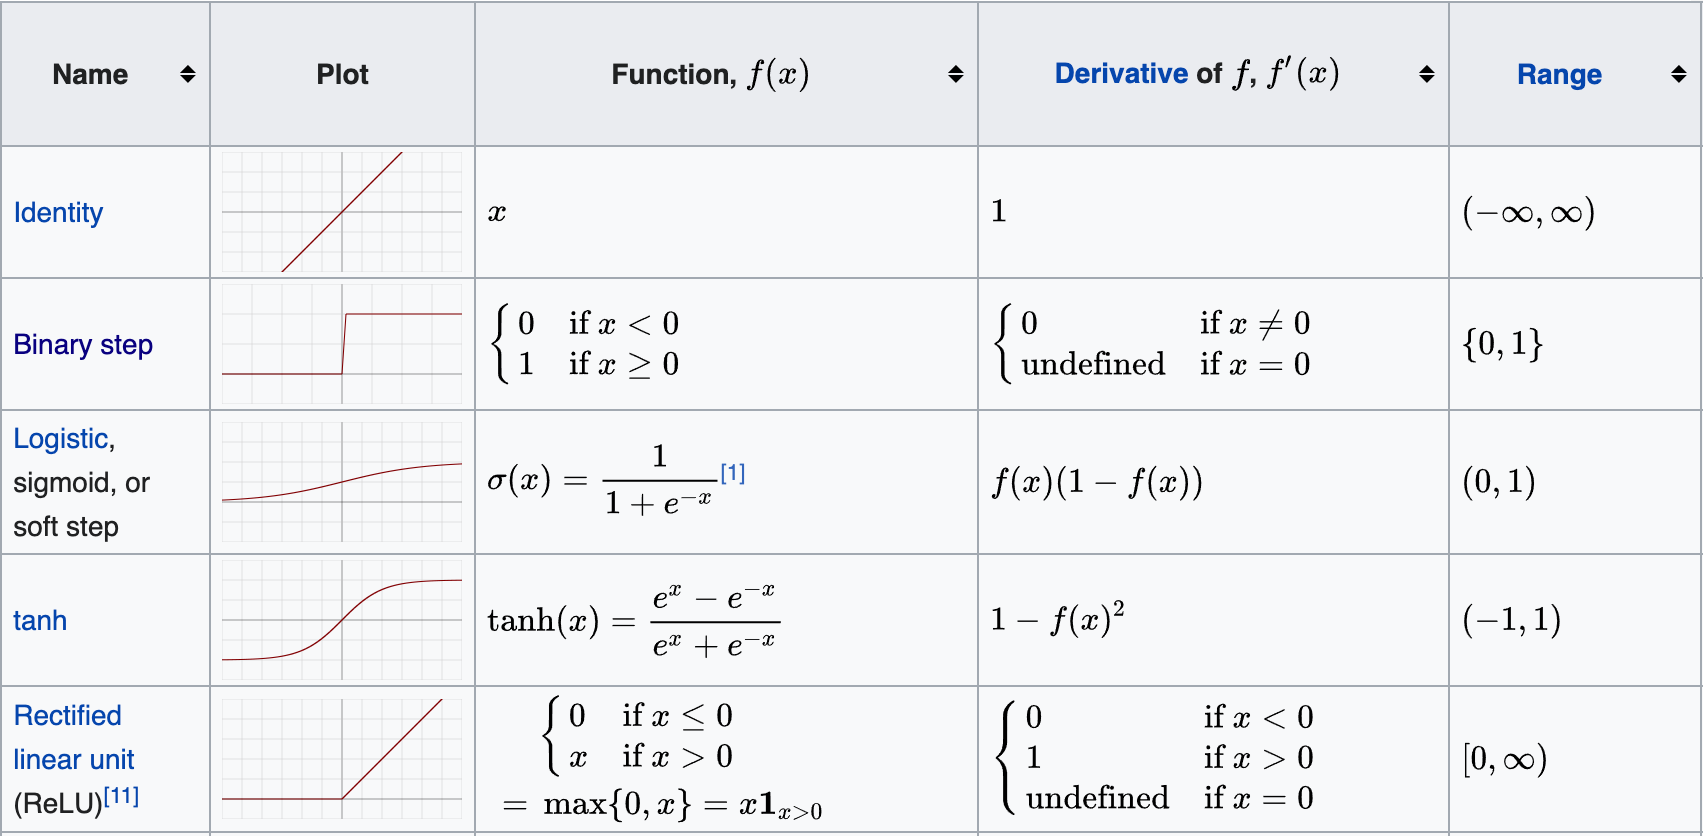 Table showing the formula, graph, derivative, and range of common activation functions